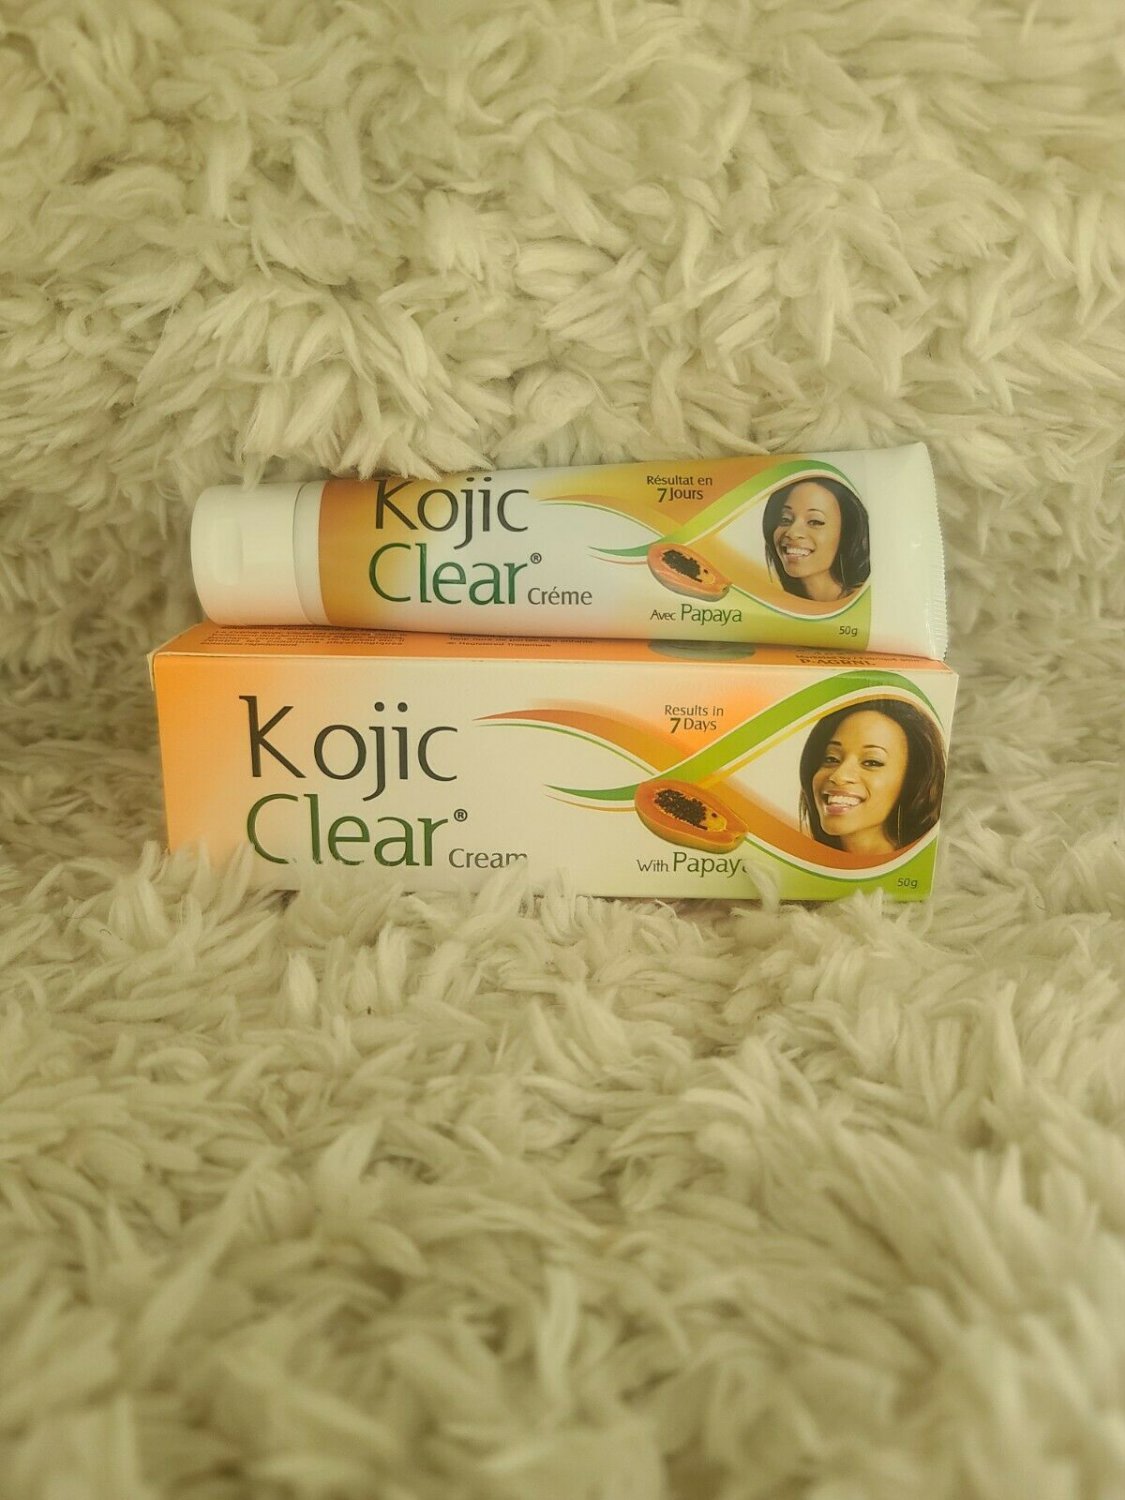 1x kojic clear cream with papaya .result in 7days